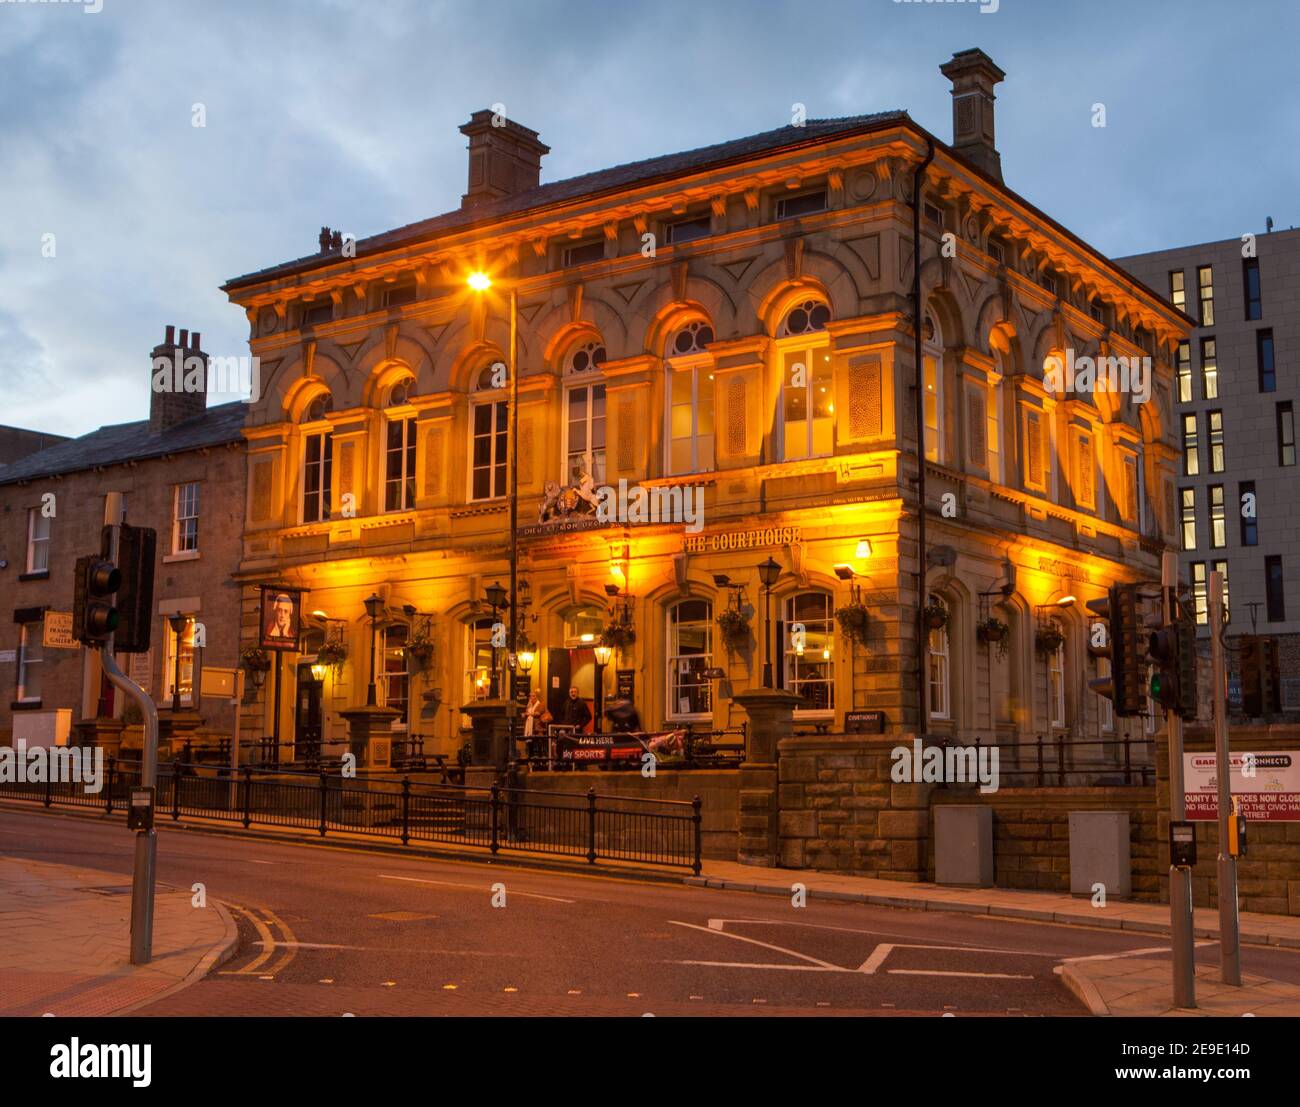 Evening view of the Courthouse pub in Barnsley, South Yorkshire Stock Photo